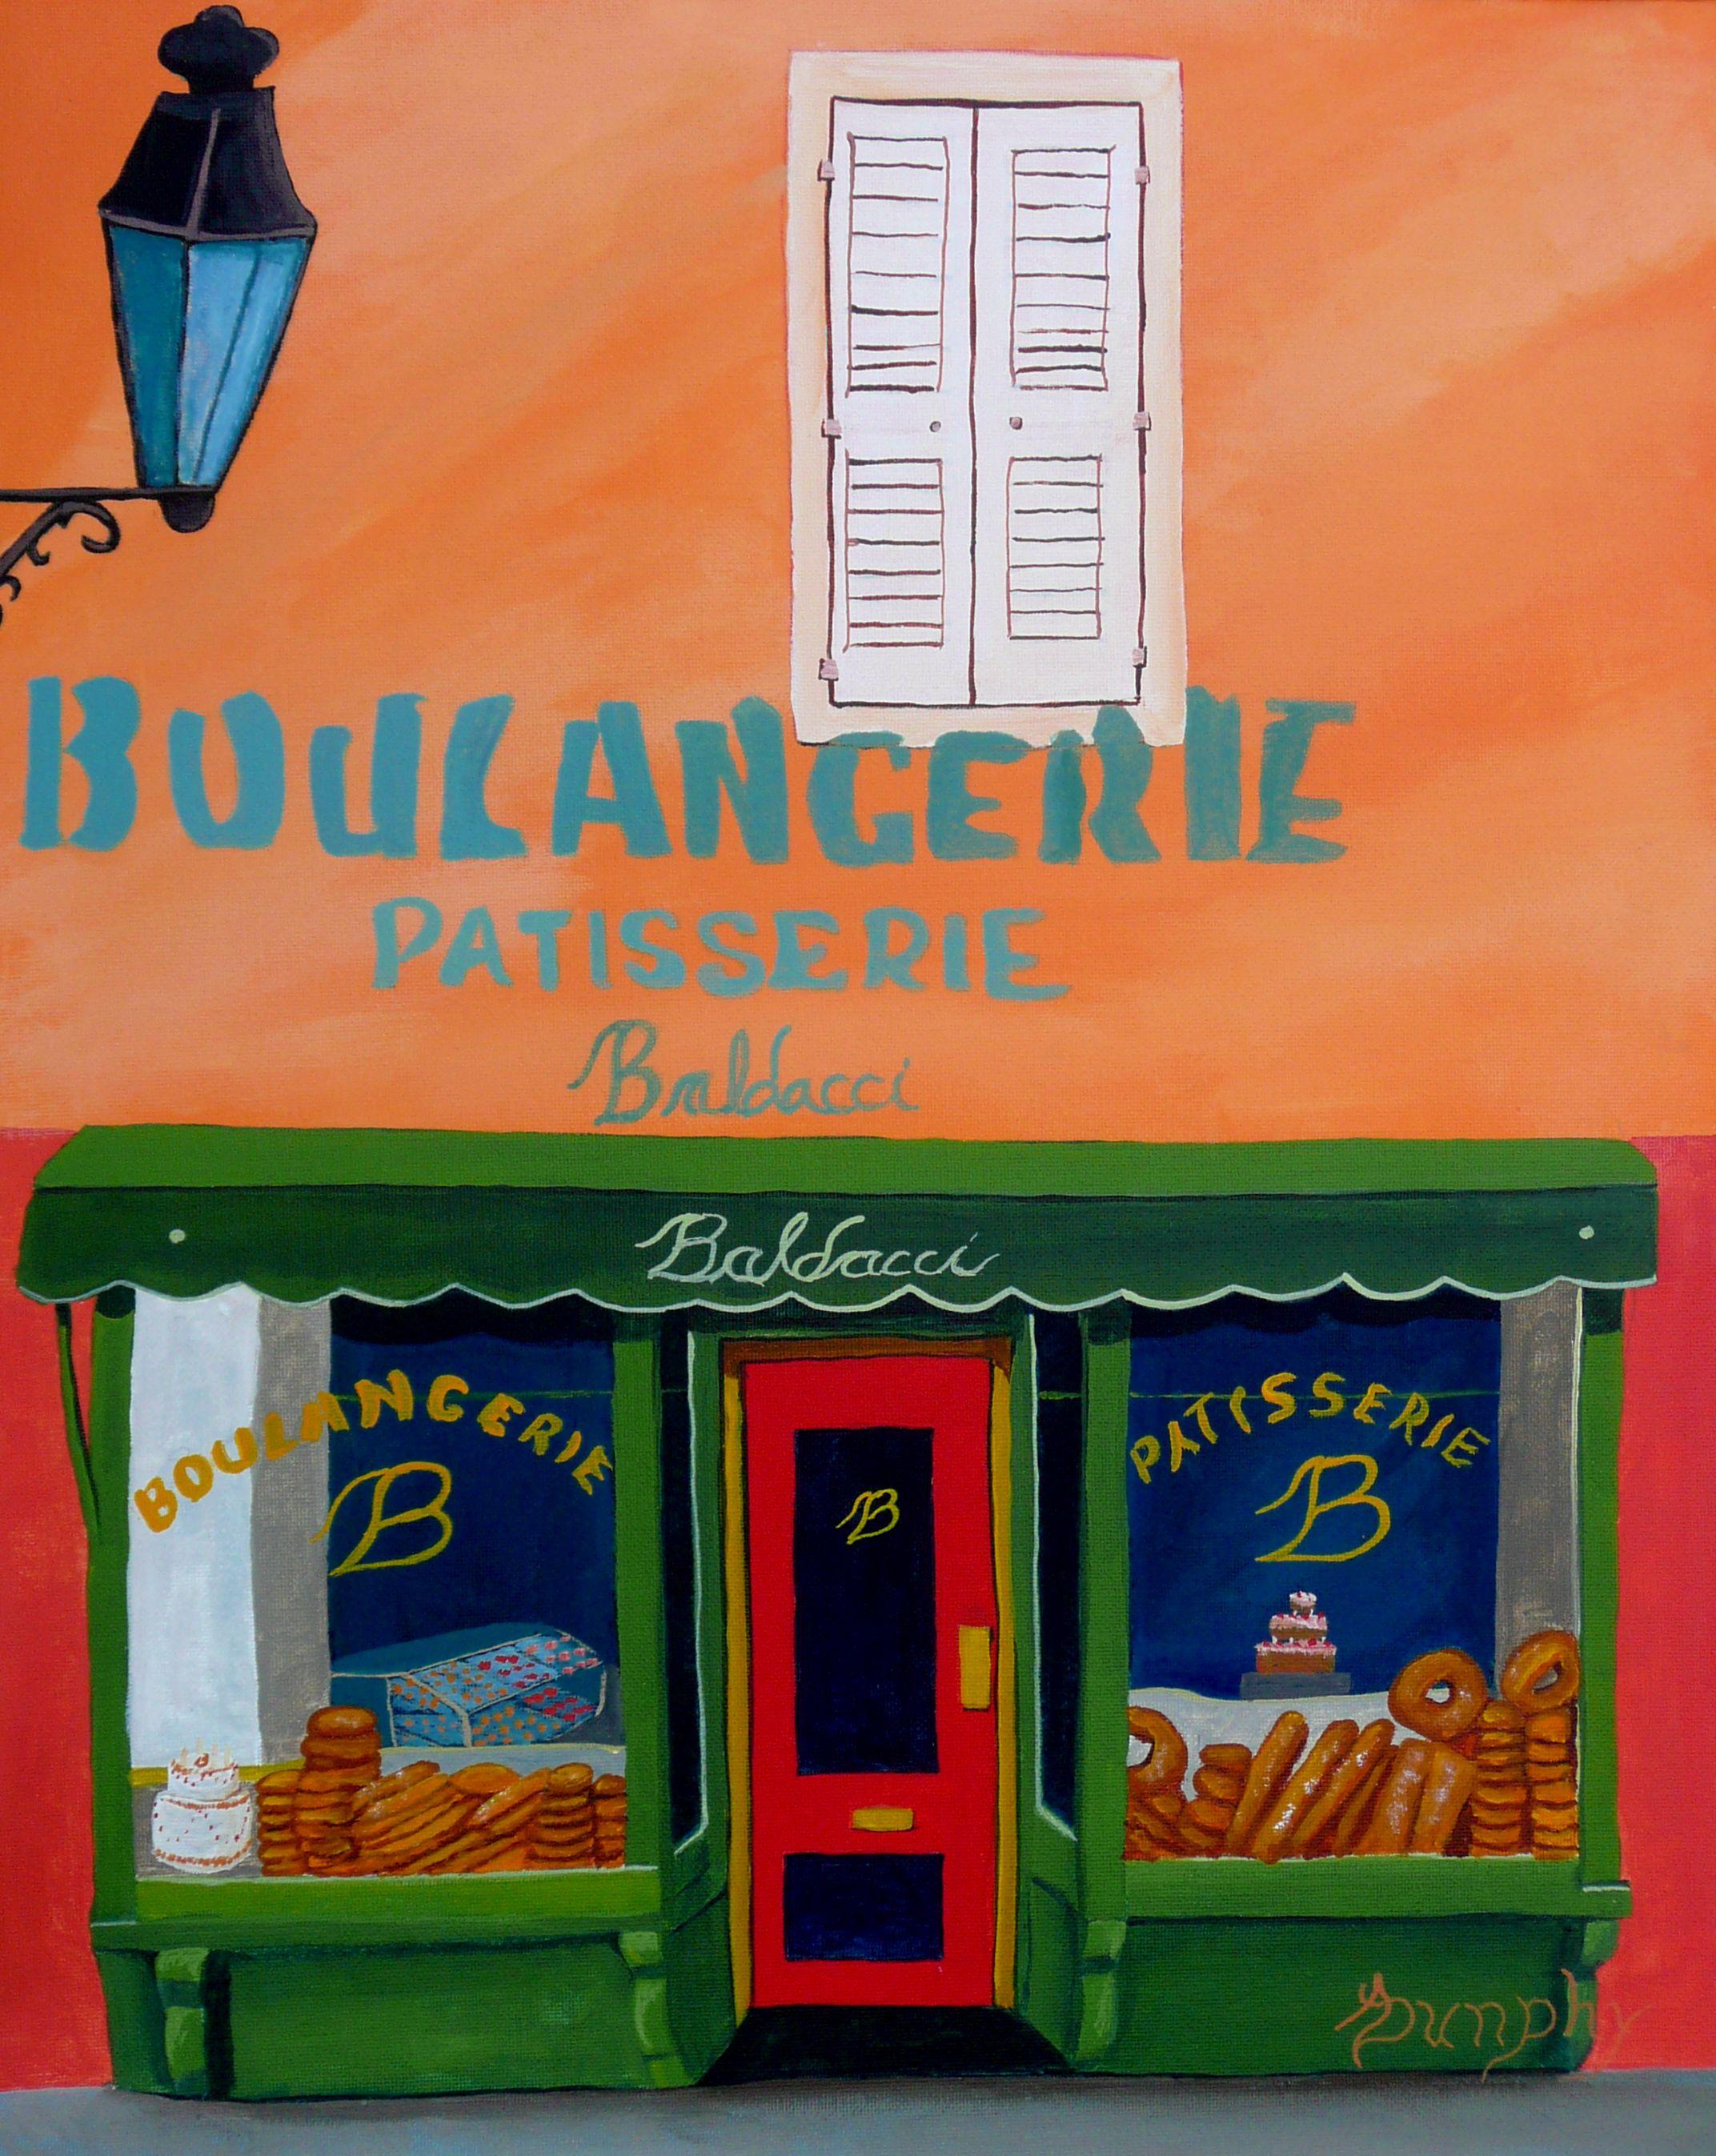 This is an Italian bakery or Boulangerie and Patisserie that I saw recently while on vacation in Rome. The bread was amazing but the cakes were even better. This storefront painting has been created using professional grade acrylics on flat canvas